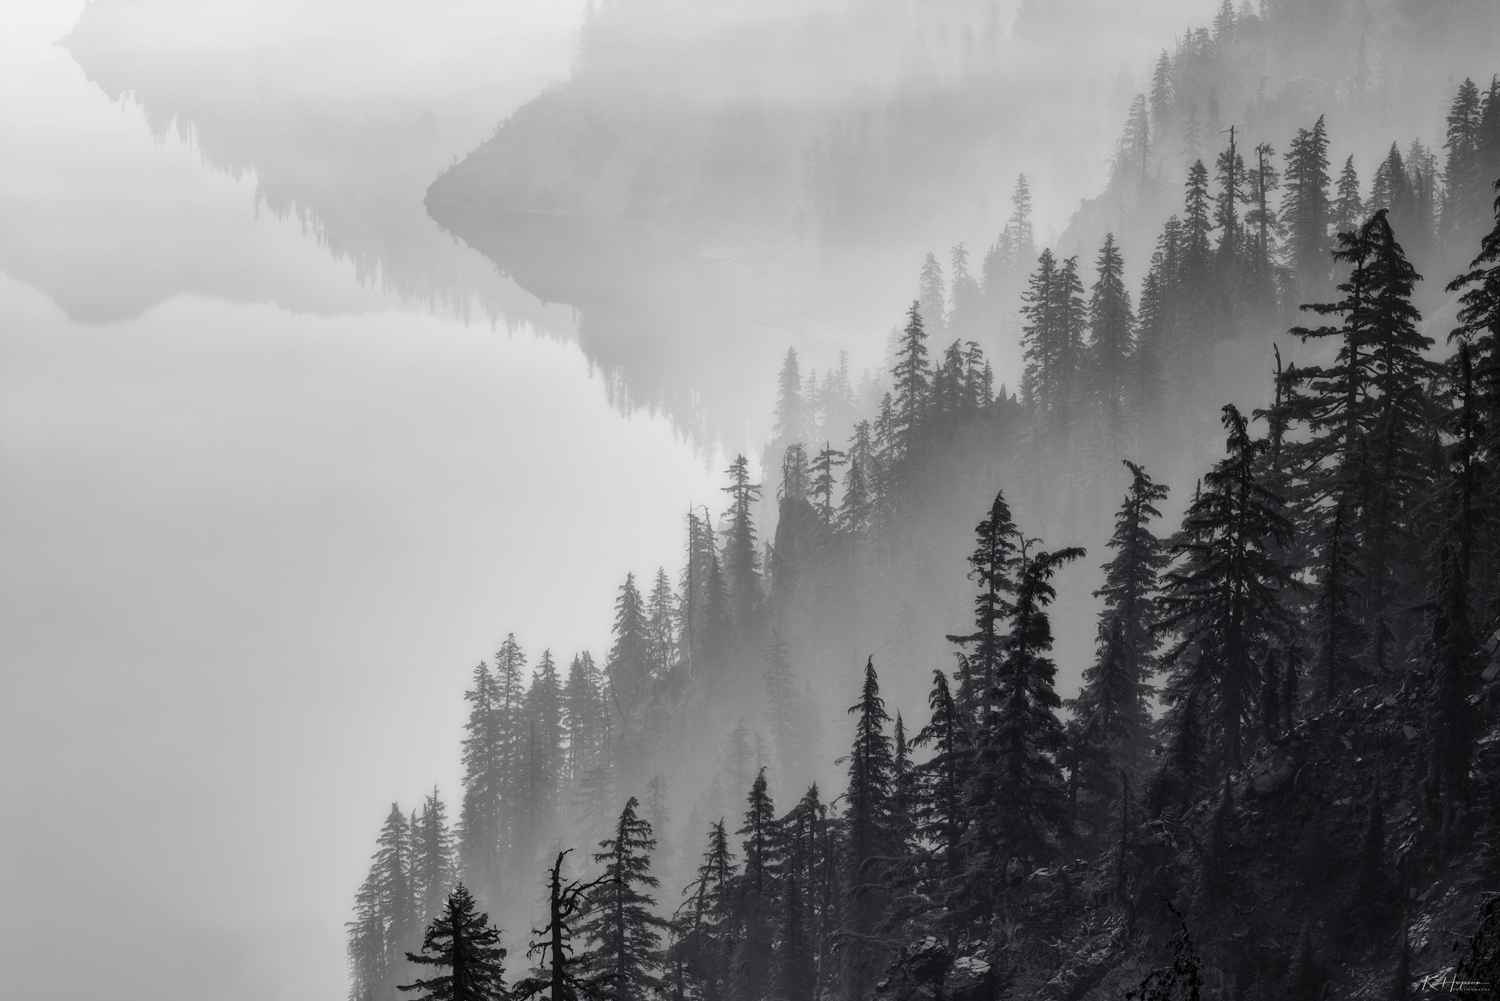 smoke weaving through the forest on the edge of crater lake in oregon